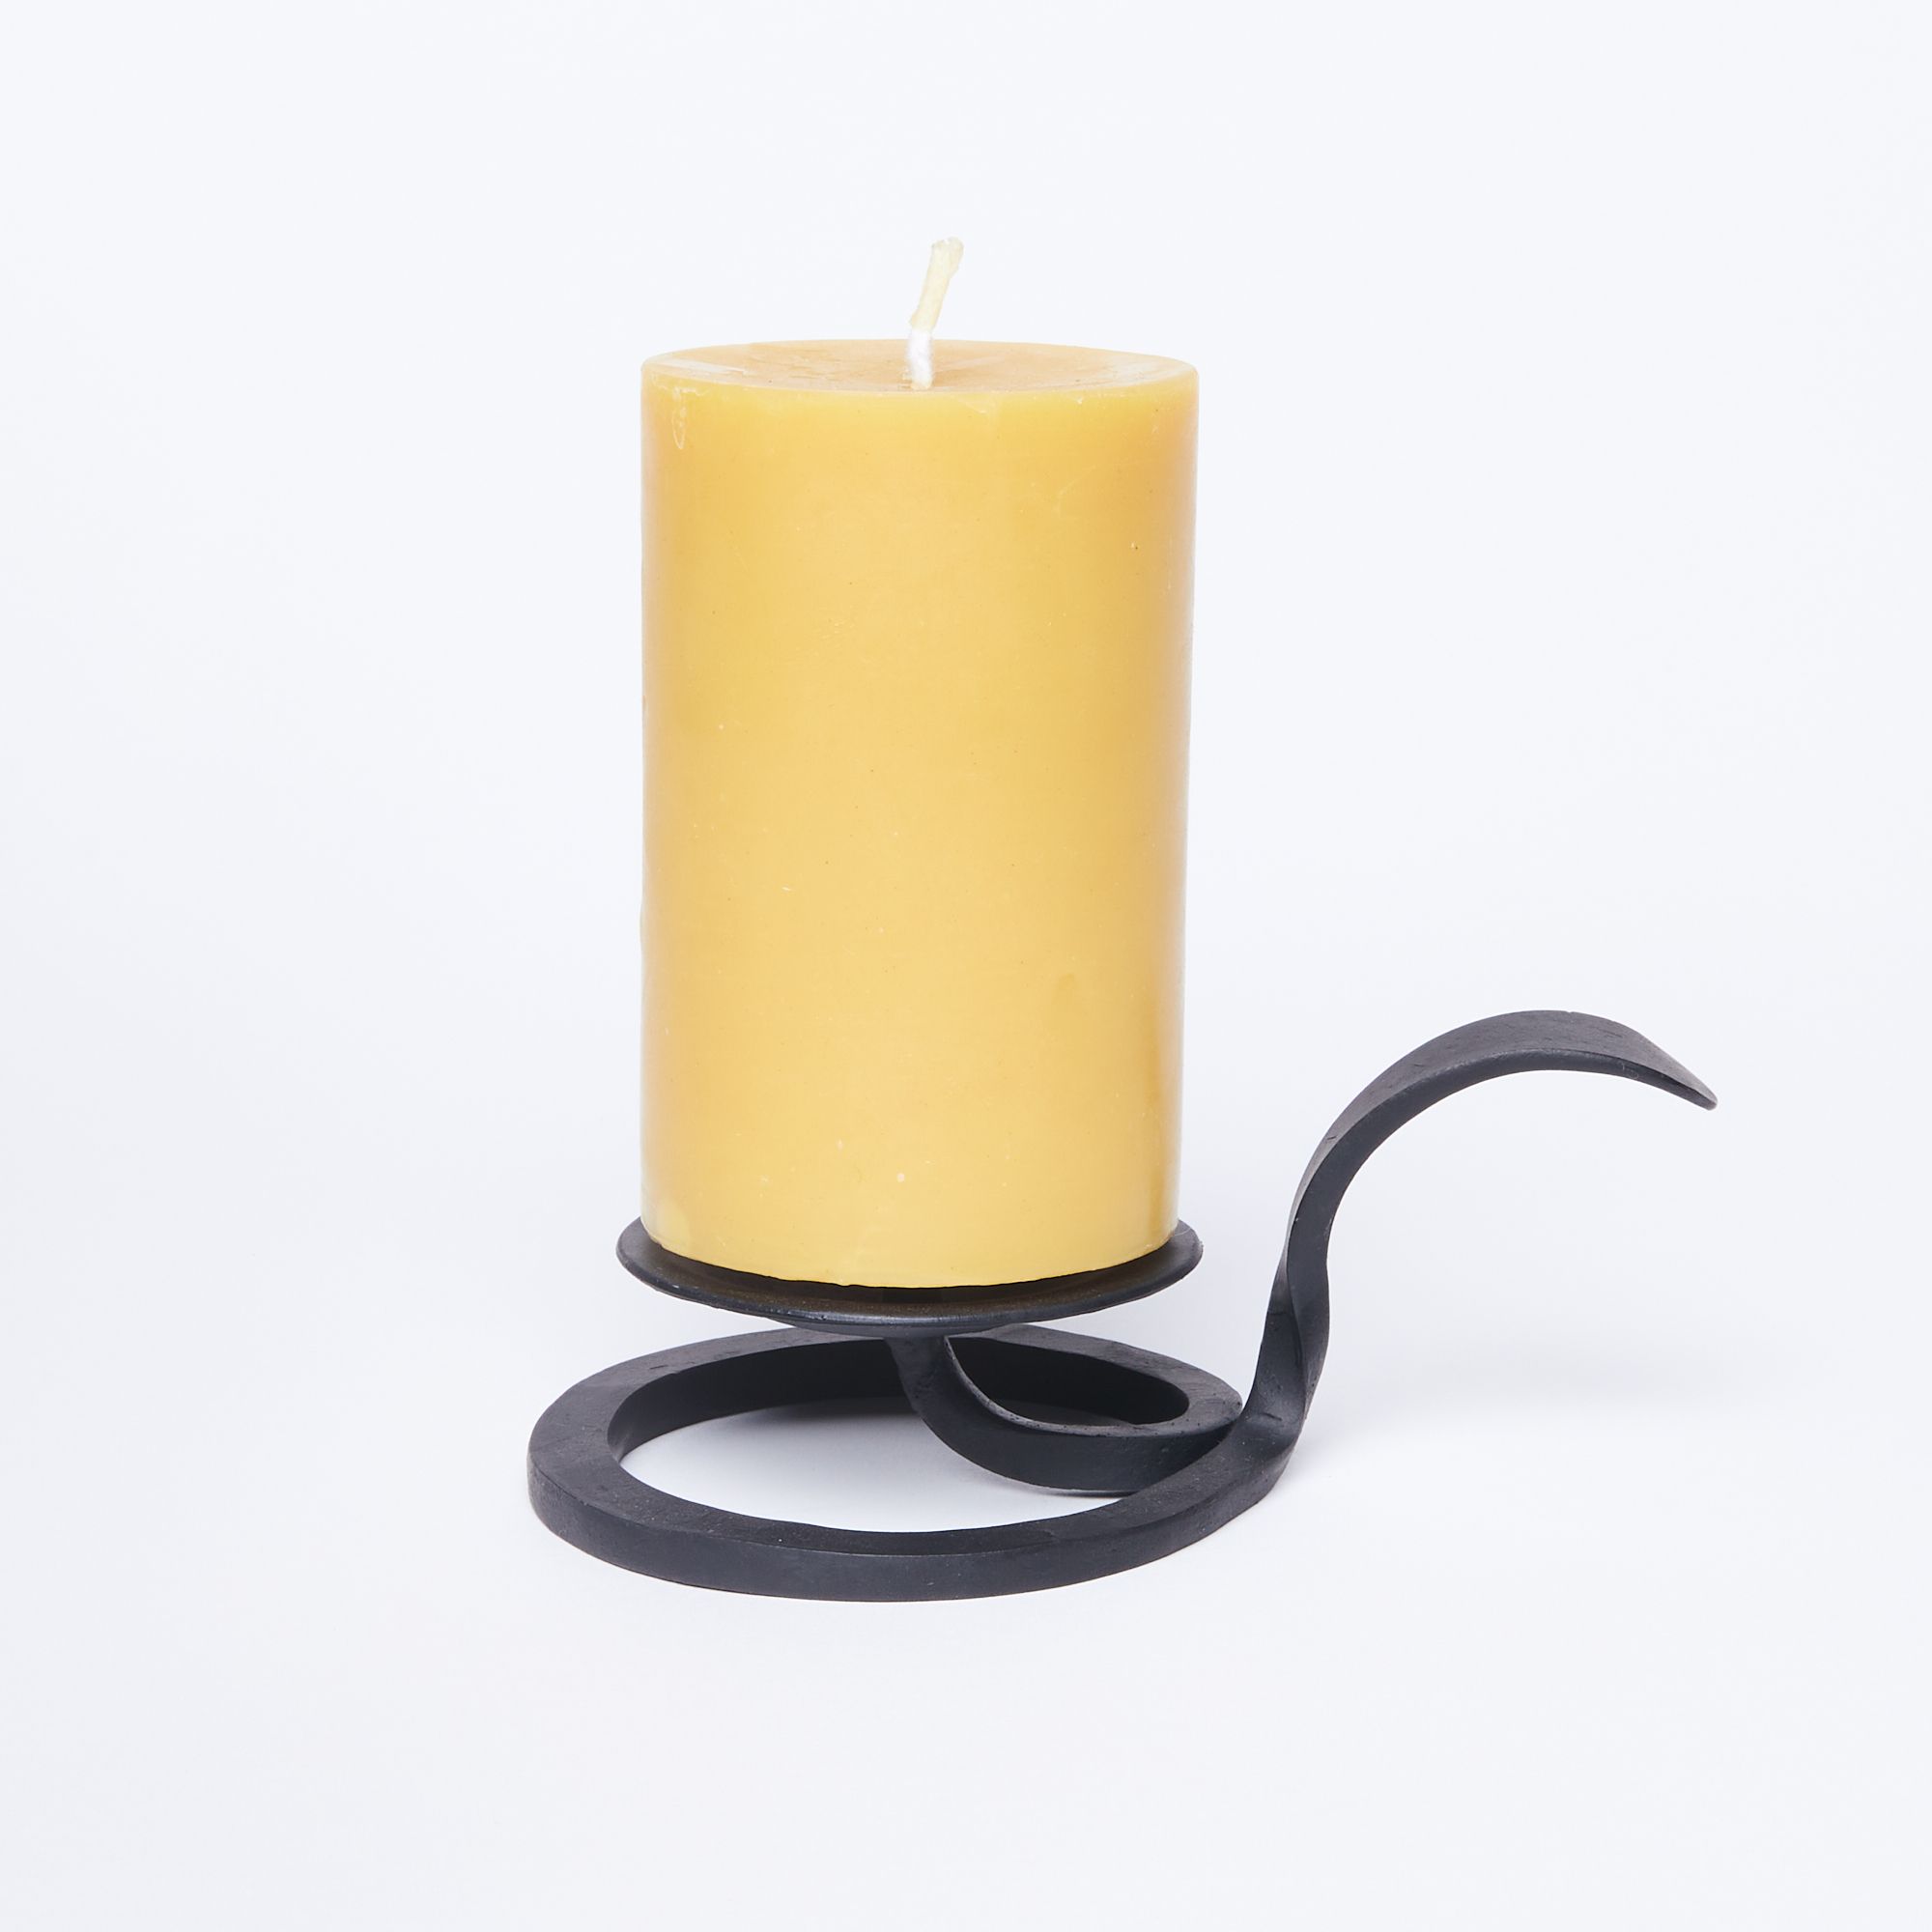 A cylindrical yellow pillar candle atop a cast iron candle stand